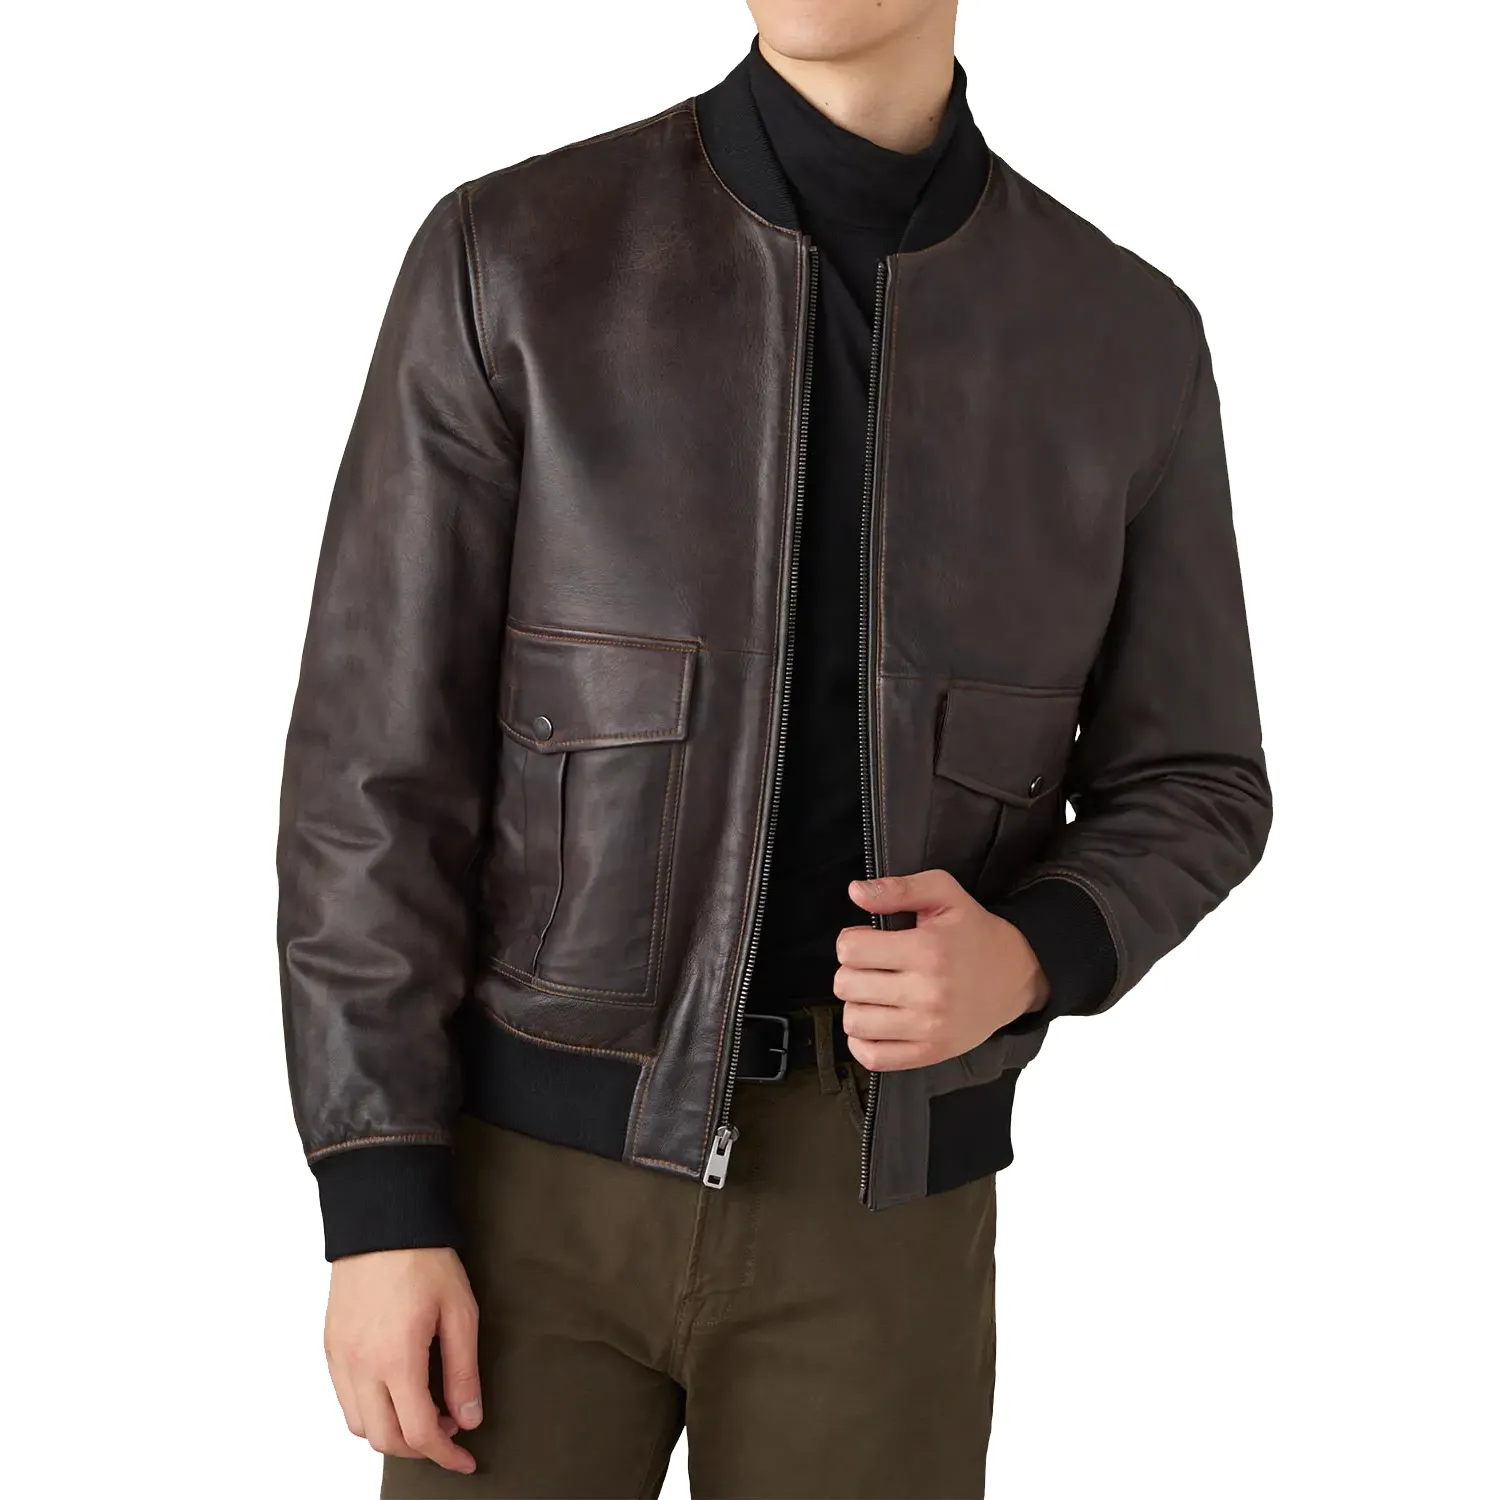 Men Real Leather Jackets Wholesale Leather Fashion Jacket in Bomber Style Genuine Cowhide Leather Jacket